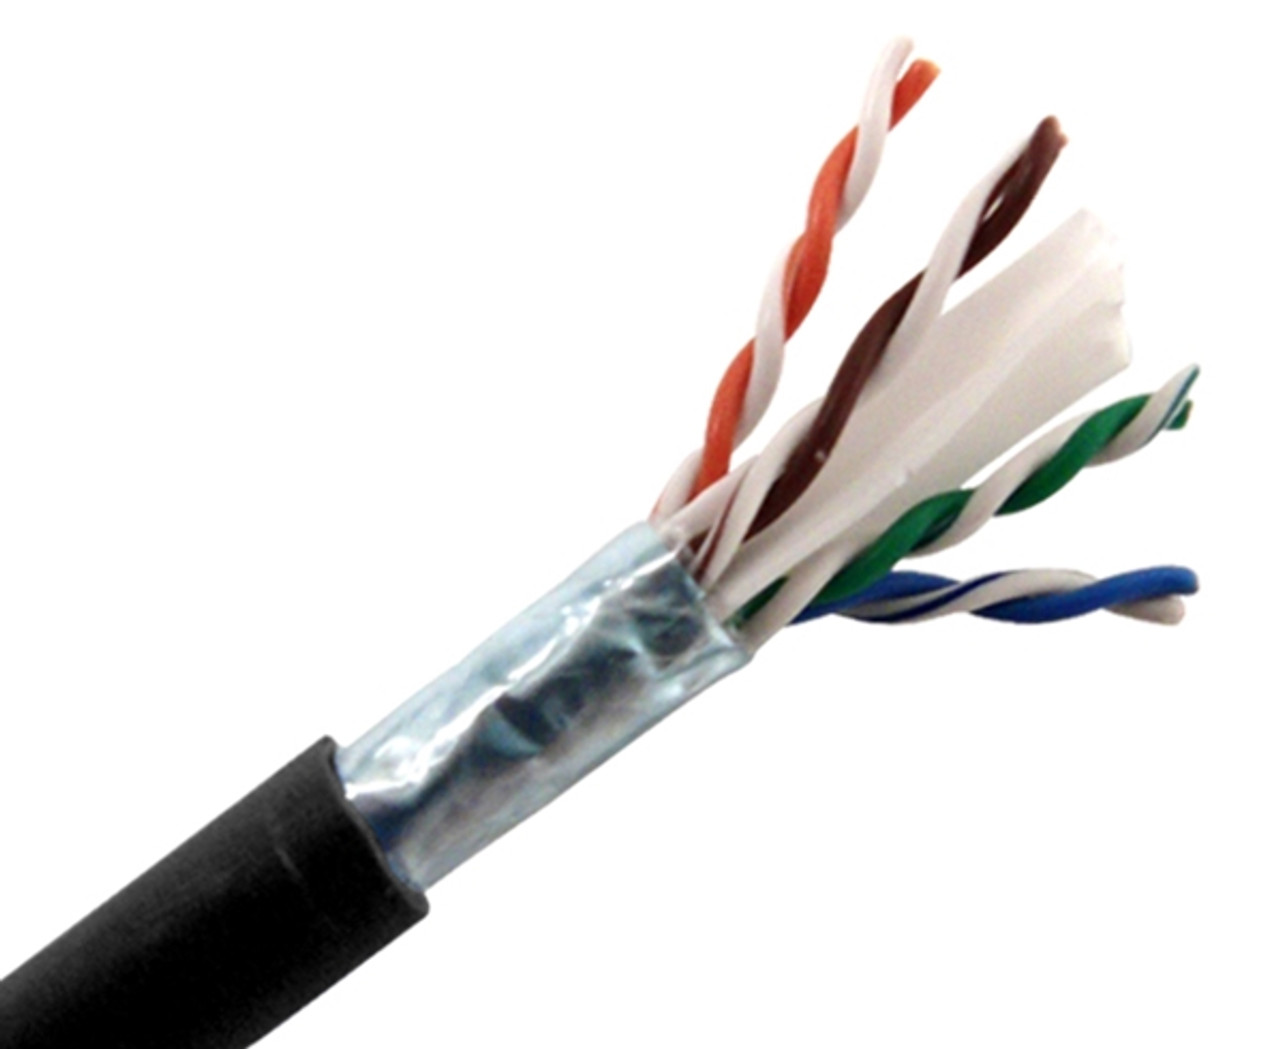 CAT6A Indoor/Outdoor Bulk Ethernet Cable, UV Resistant, Shielded